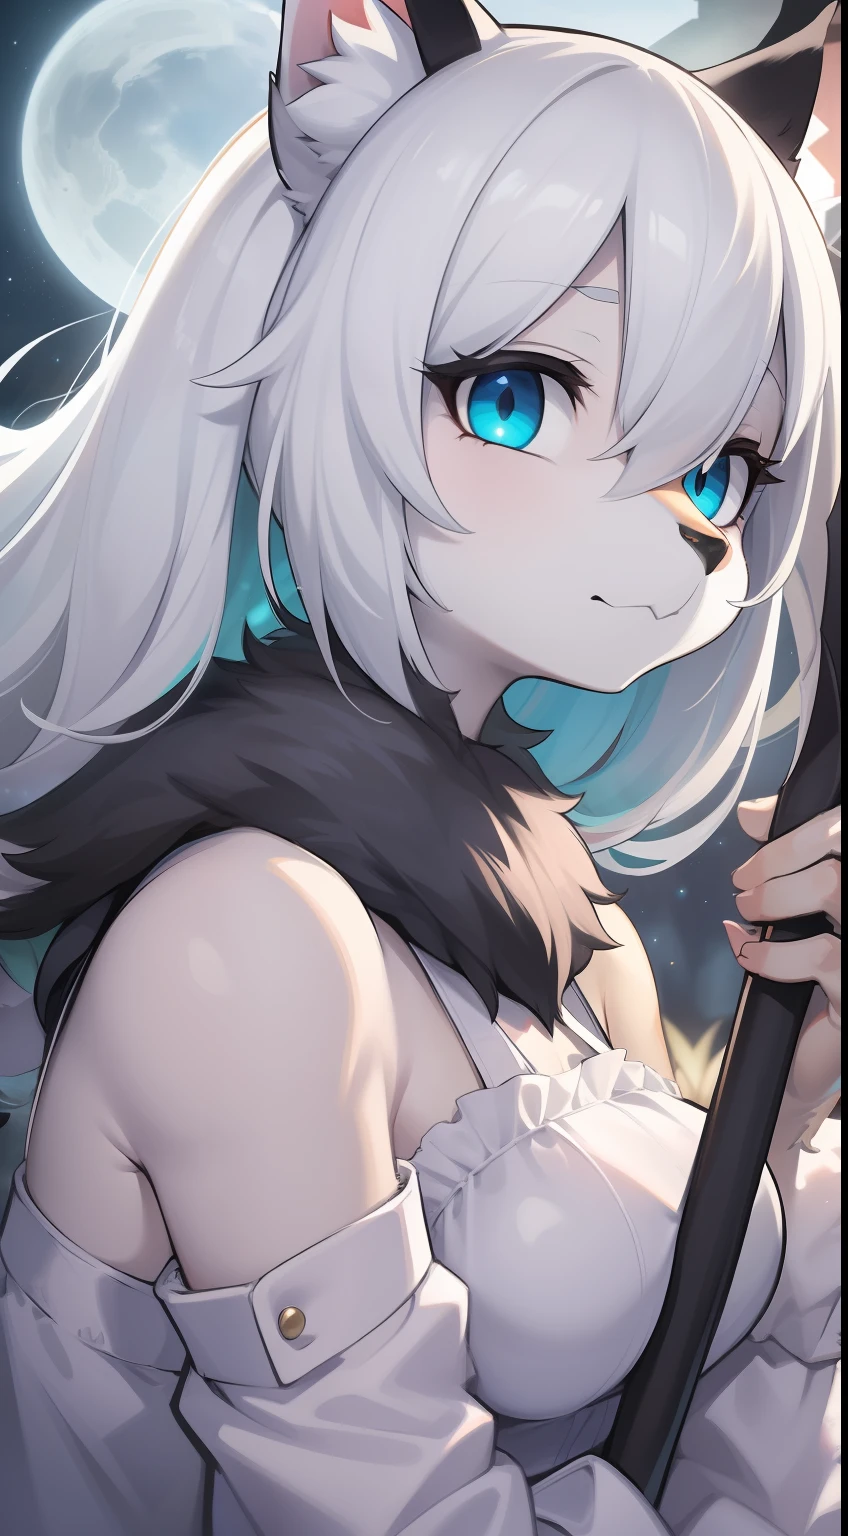 Cat girl，was hairy，shaggy，Skin fur，White fur，Forelimb hands， solid circle eyes，White ears，White face fur ，One side of the eye is blue，The other eye is blue-green，Super cute face，With a scythe，Raven on the shoulder，White dress，Ambient light，Ultra-fine fur，volumettic light，White hair, hair splayed out, Shiny hair, low twintails, solid circle eyes, dashed eyes, bangs, wicked, Contrast of light and shade, Ultra HDR, Masterpiece, Super detail，ruin，Night，Galaxy River